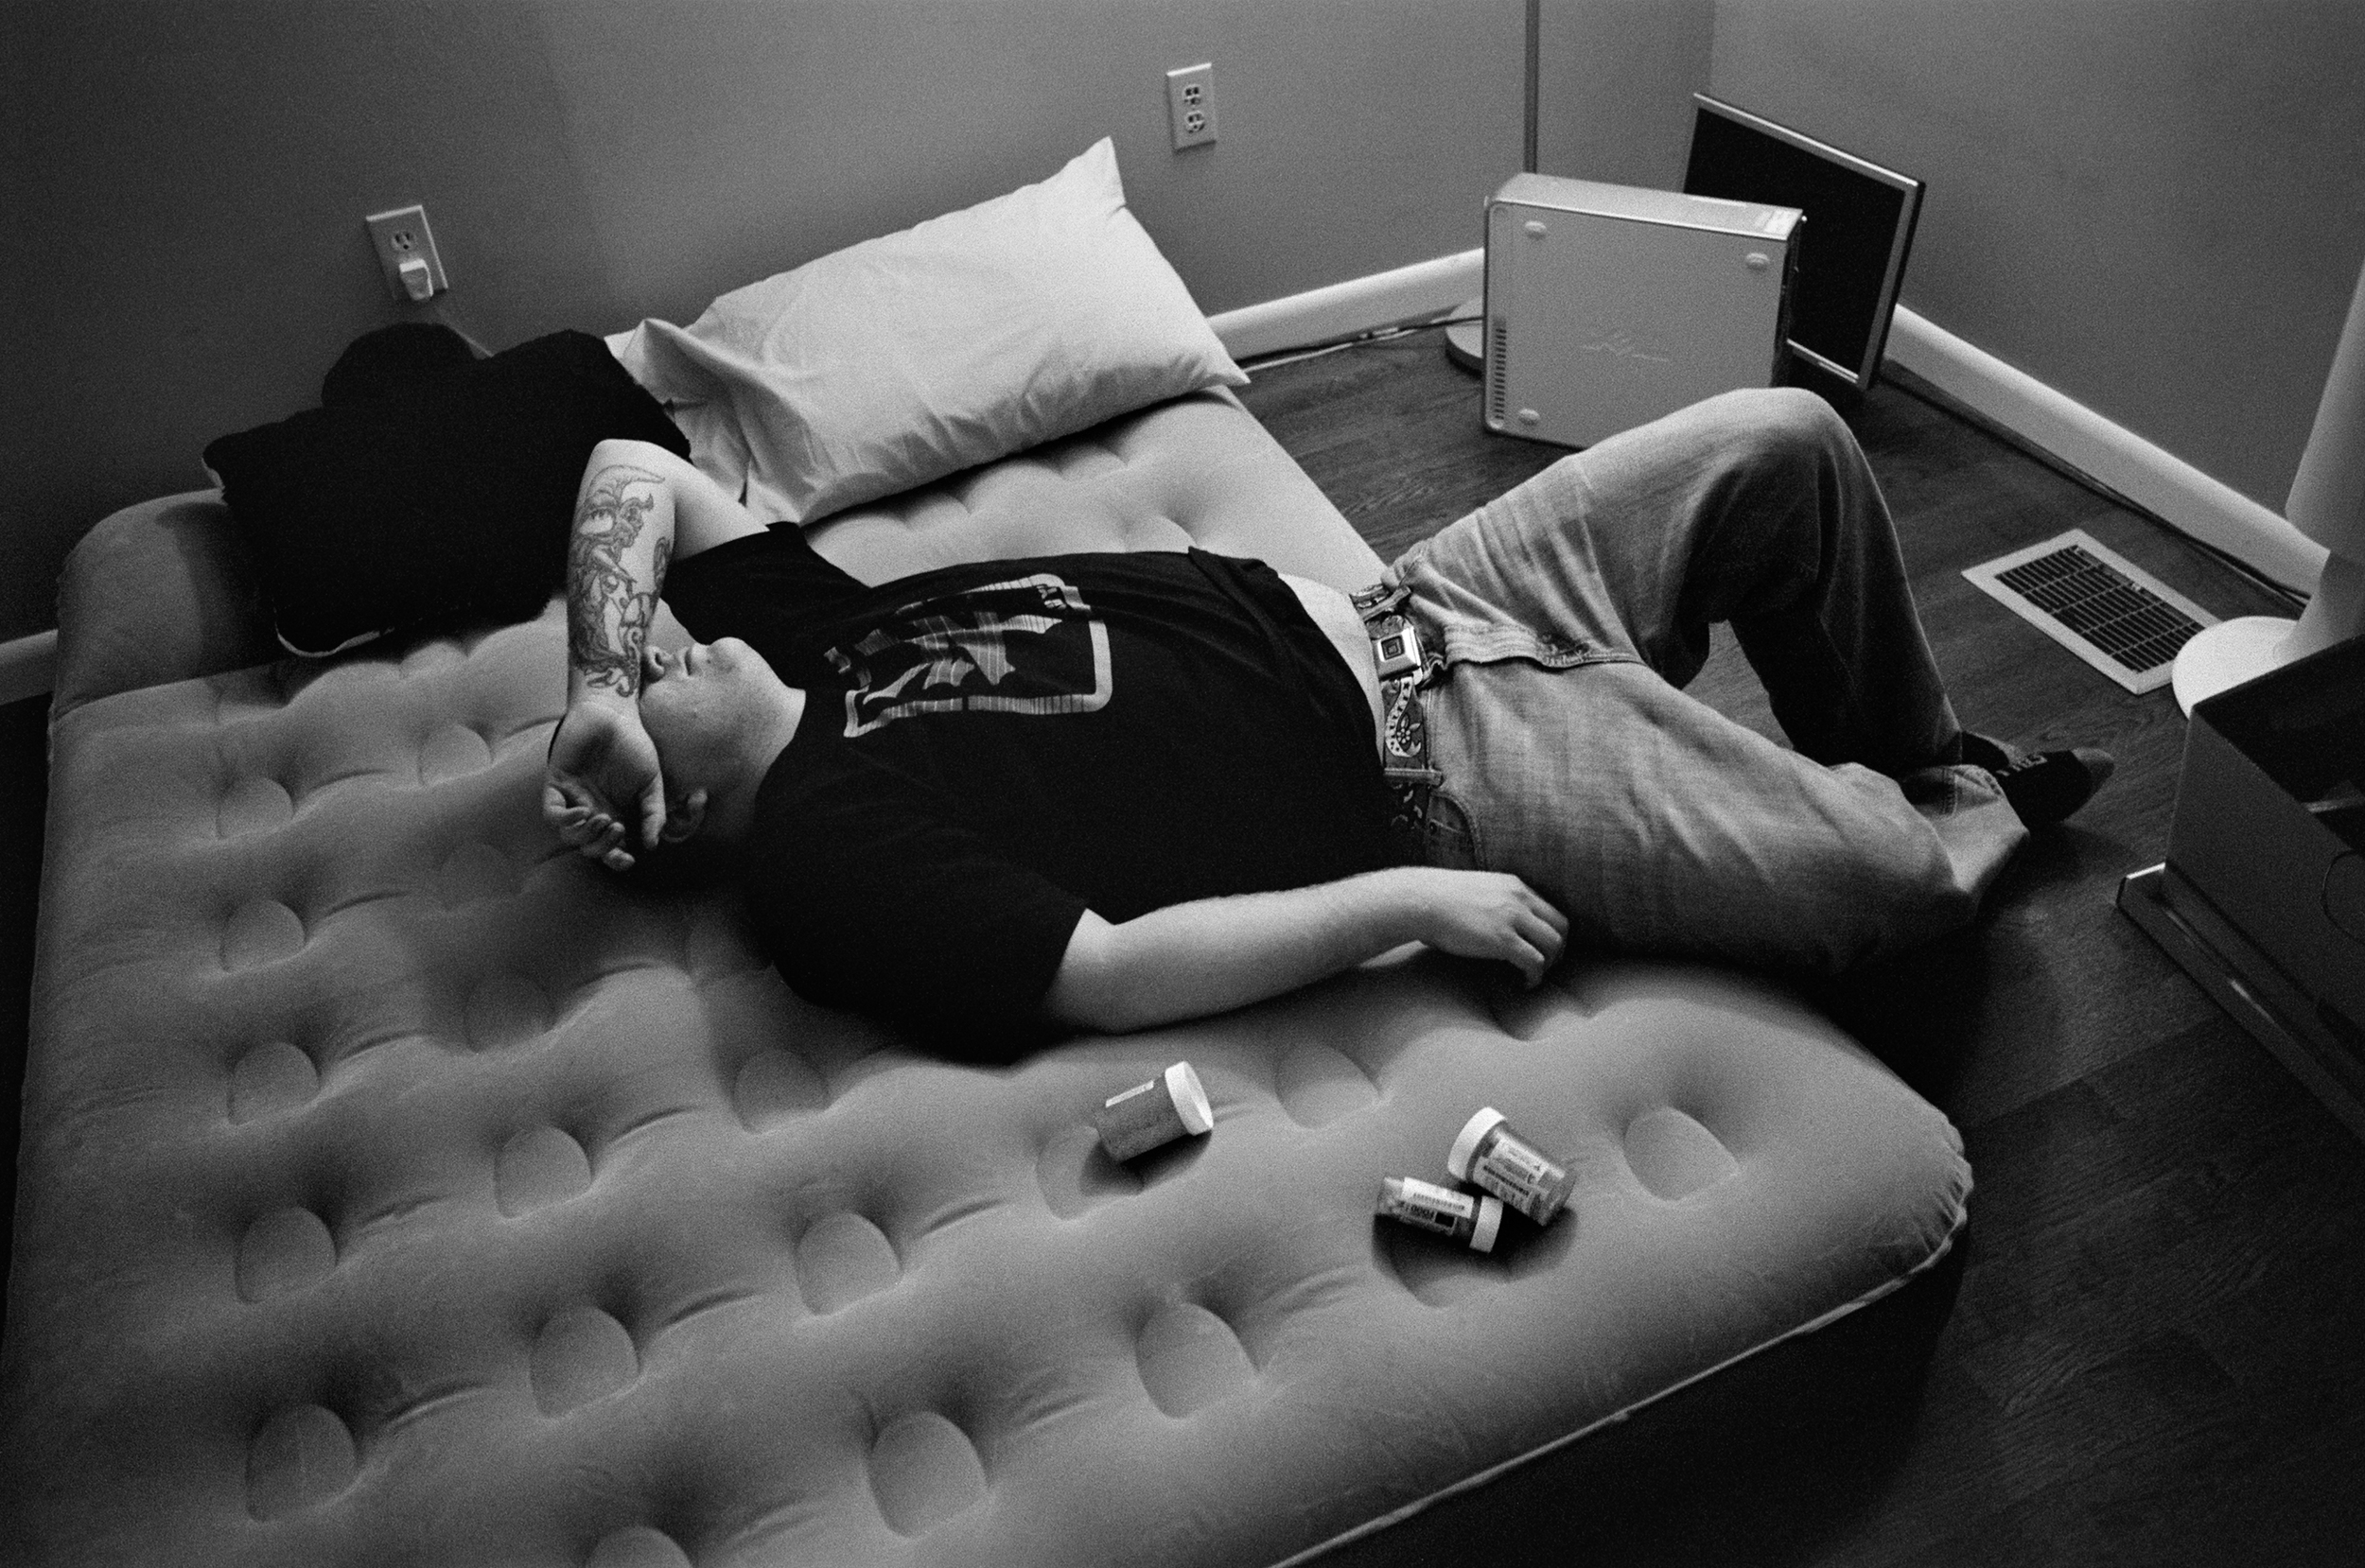  SPC Adam Ramsey lies exhausted on his air mattress bed with his prescription medications after packing to leave Watertown, New York in January 2011. 